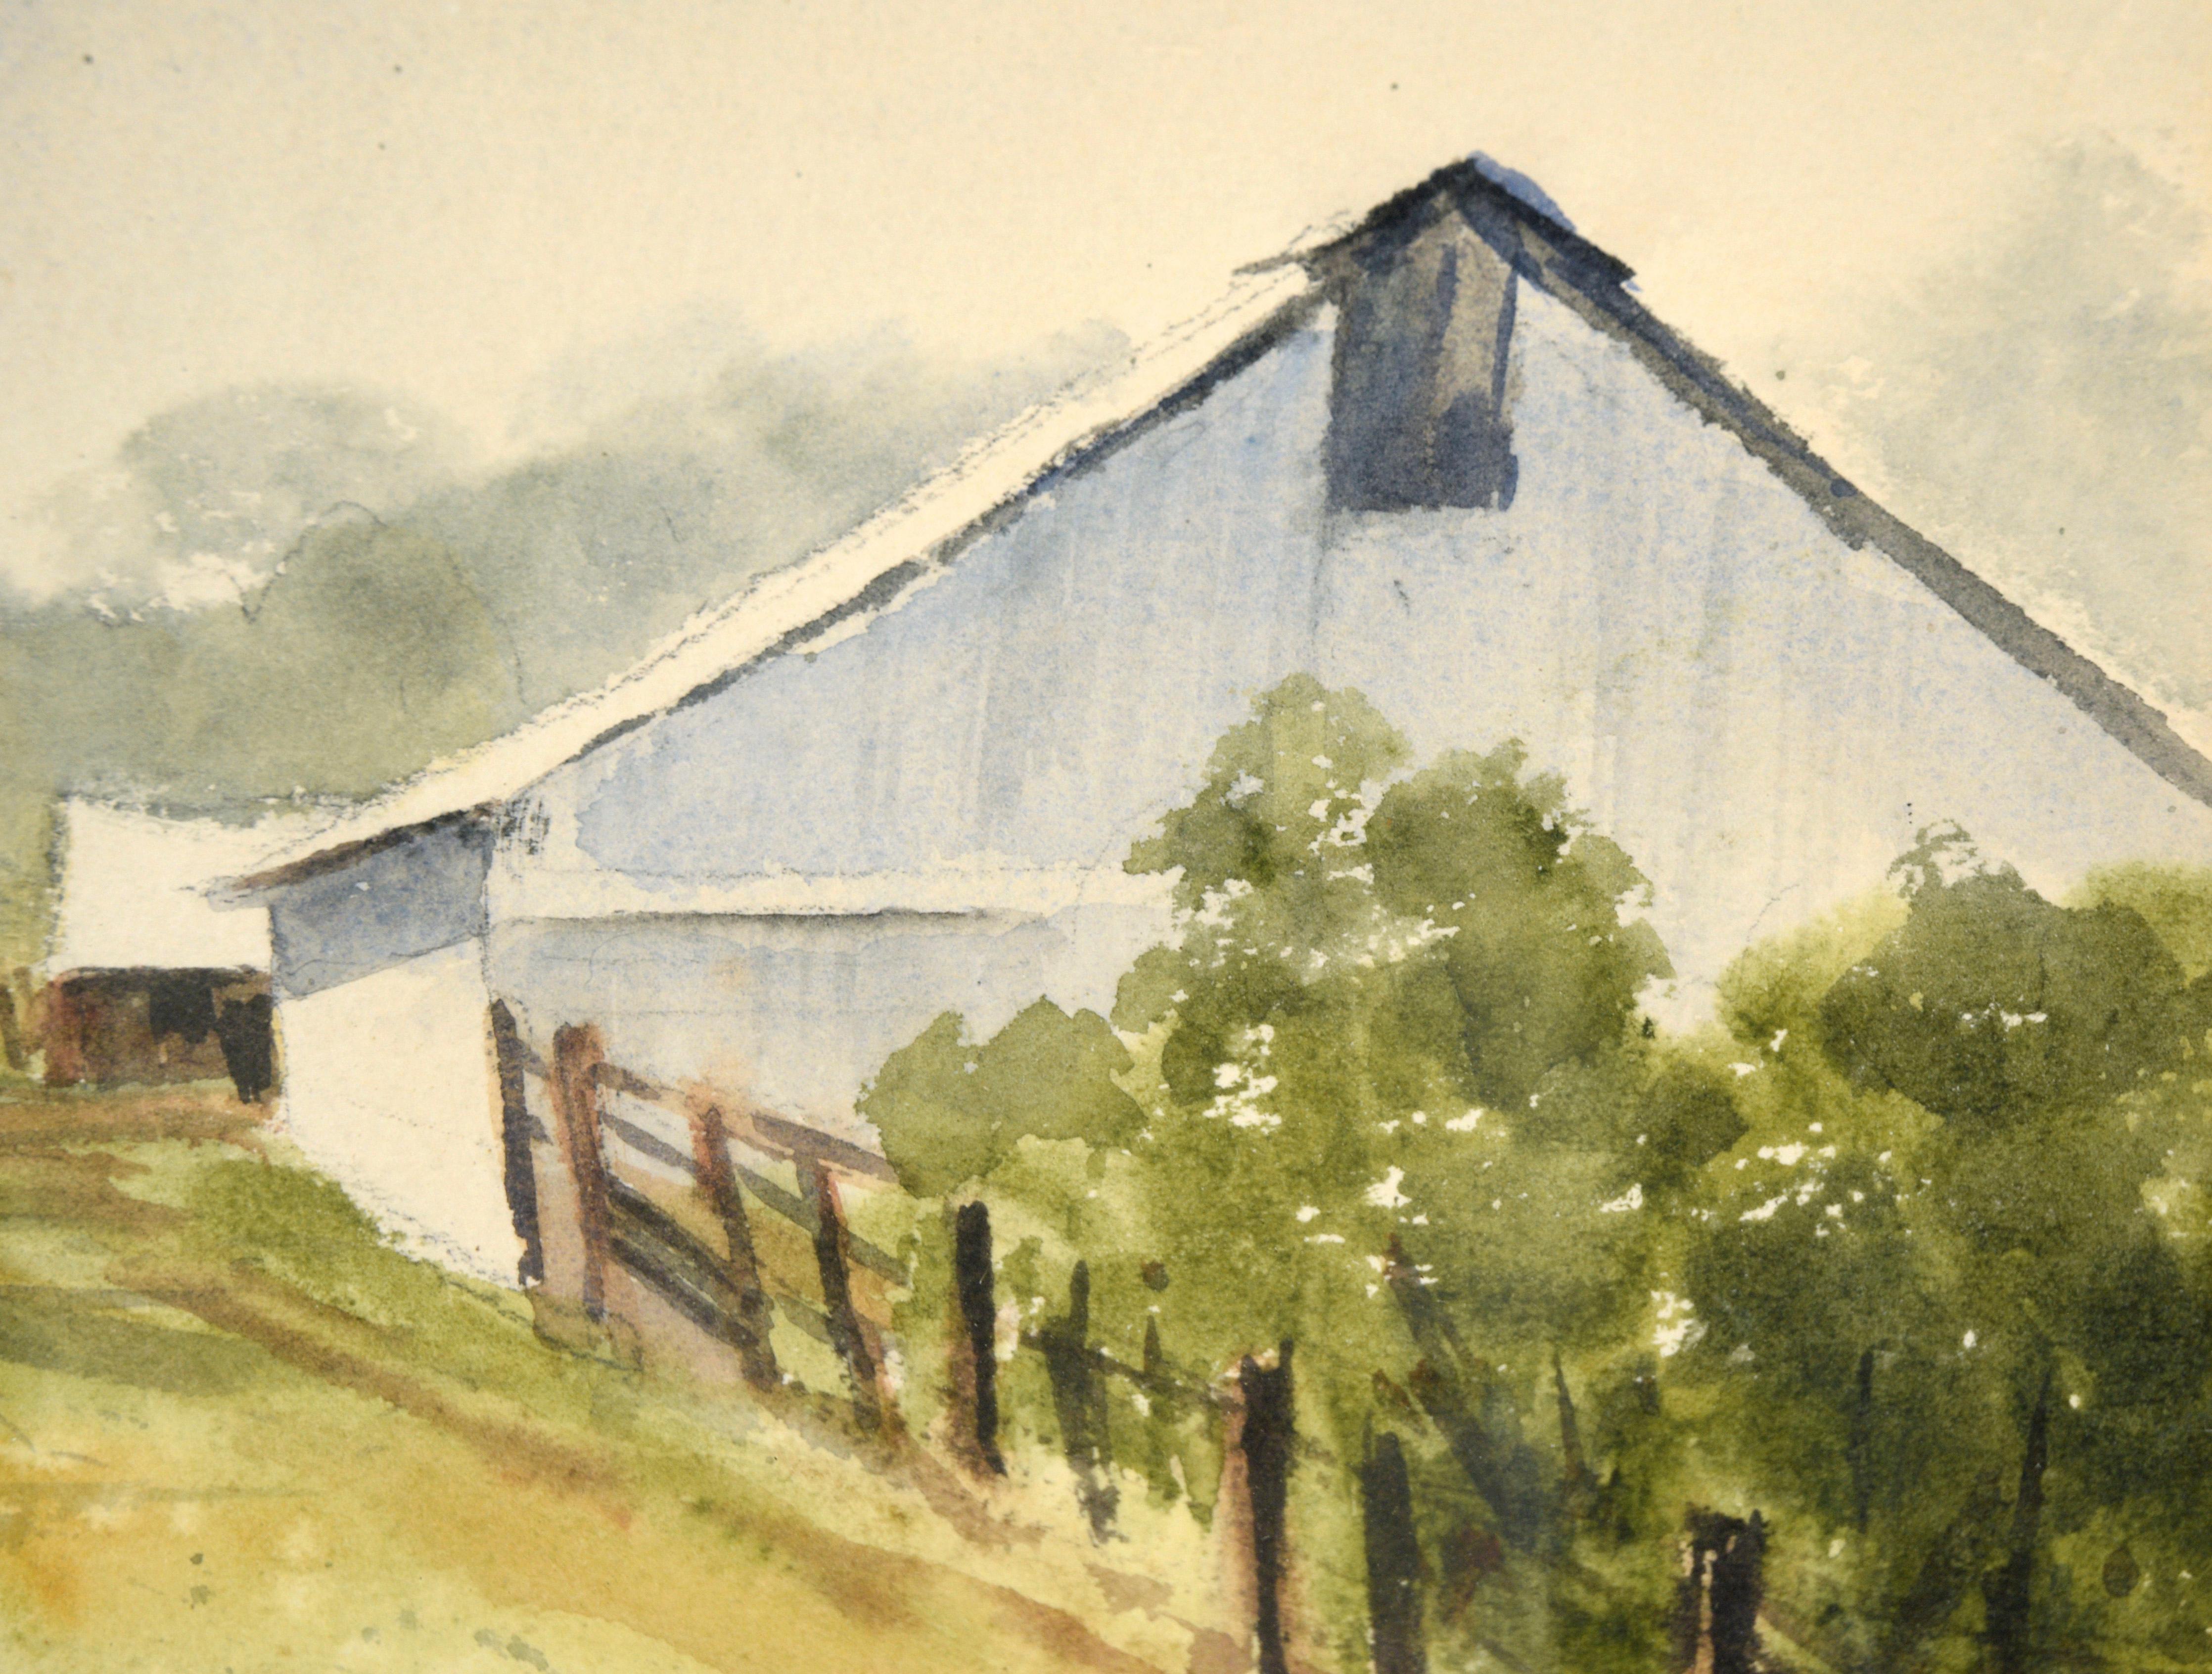 Grey Barn and Brown House - Rural California Landscape in Watercolor on Paper

Serene country landscape by California artist Alice M. Duke (American, 1921-2012). A brown farmhouse is at the left side of the composition, on top of a slight hill. To